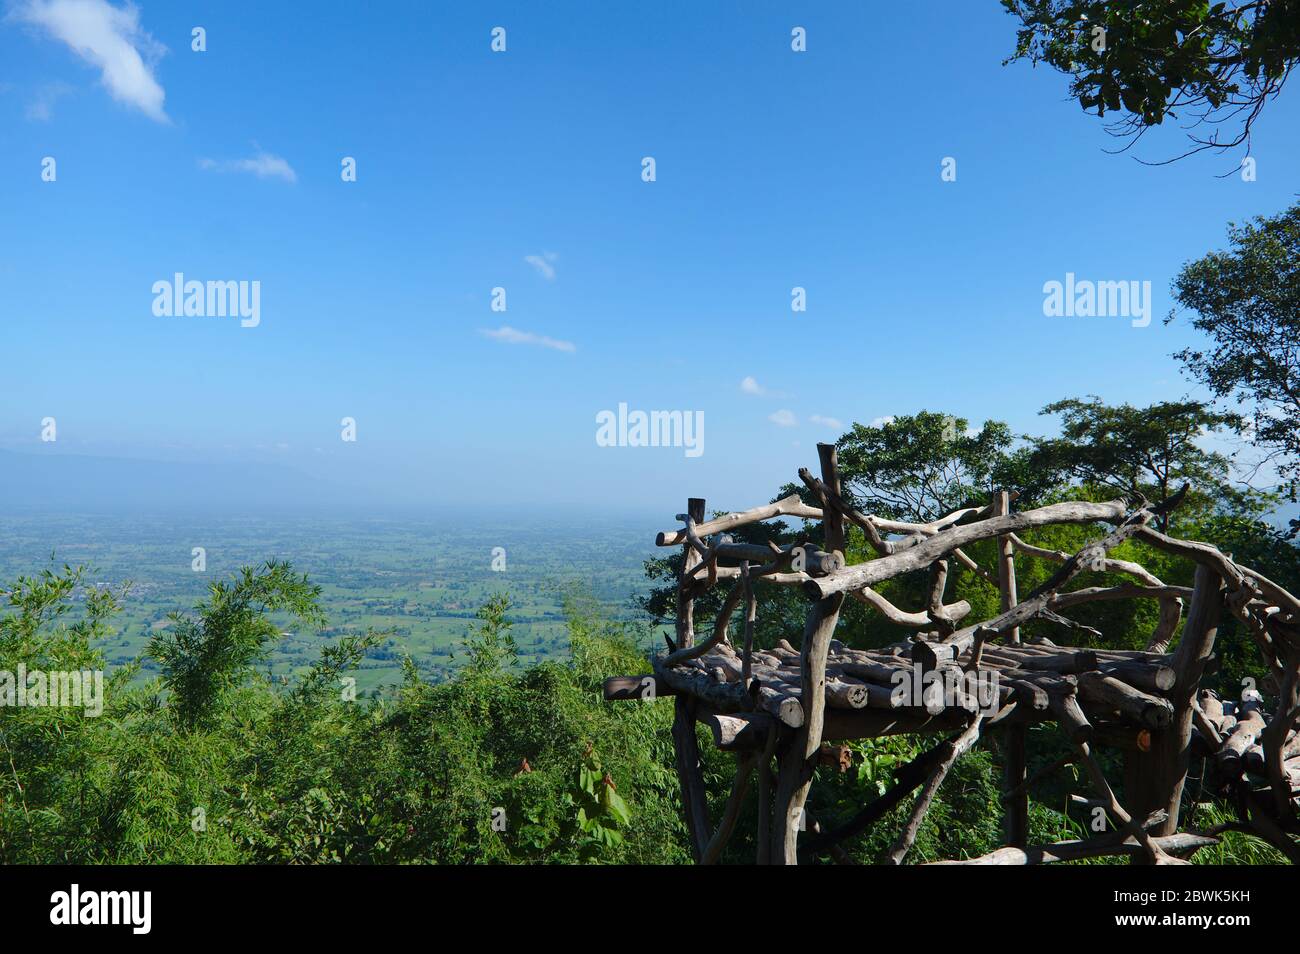 Phu Laen Kha National Park is a national park in Thailand. Stock Photo